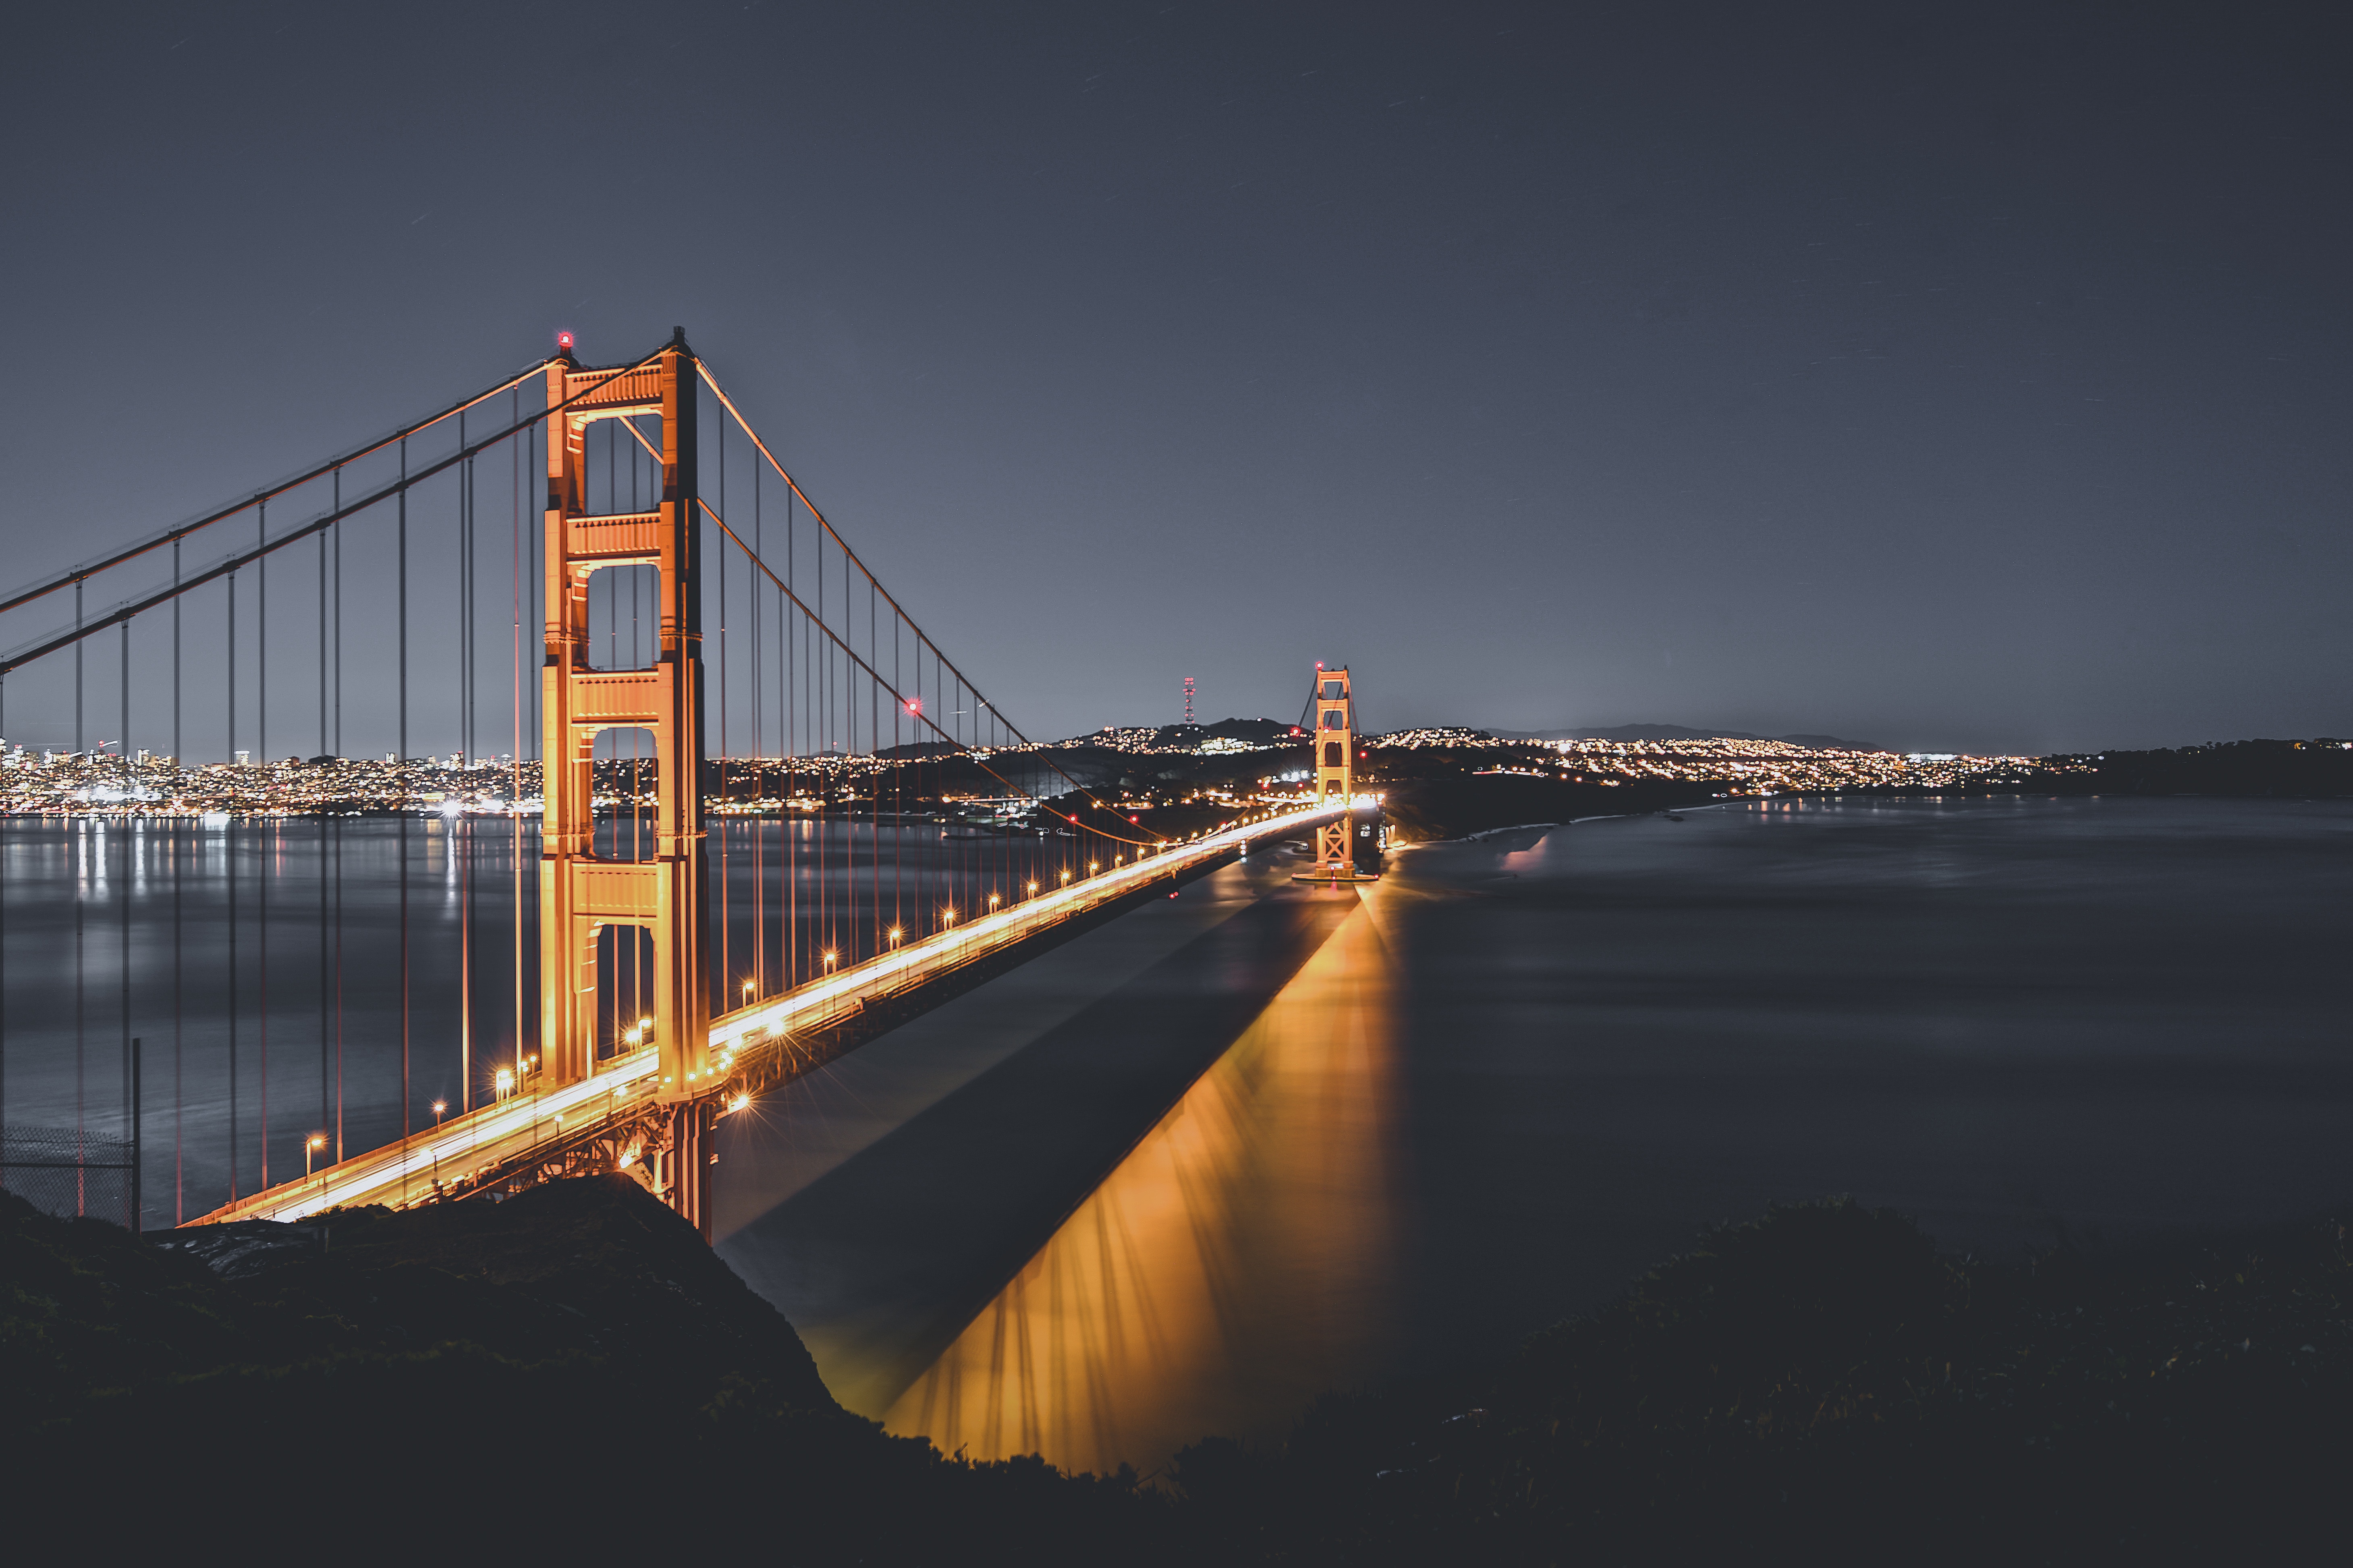 Fly over the Golden Gate bridge with business class flights